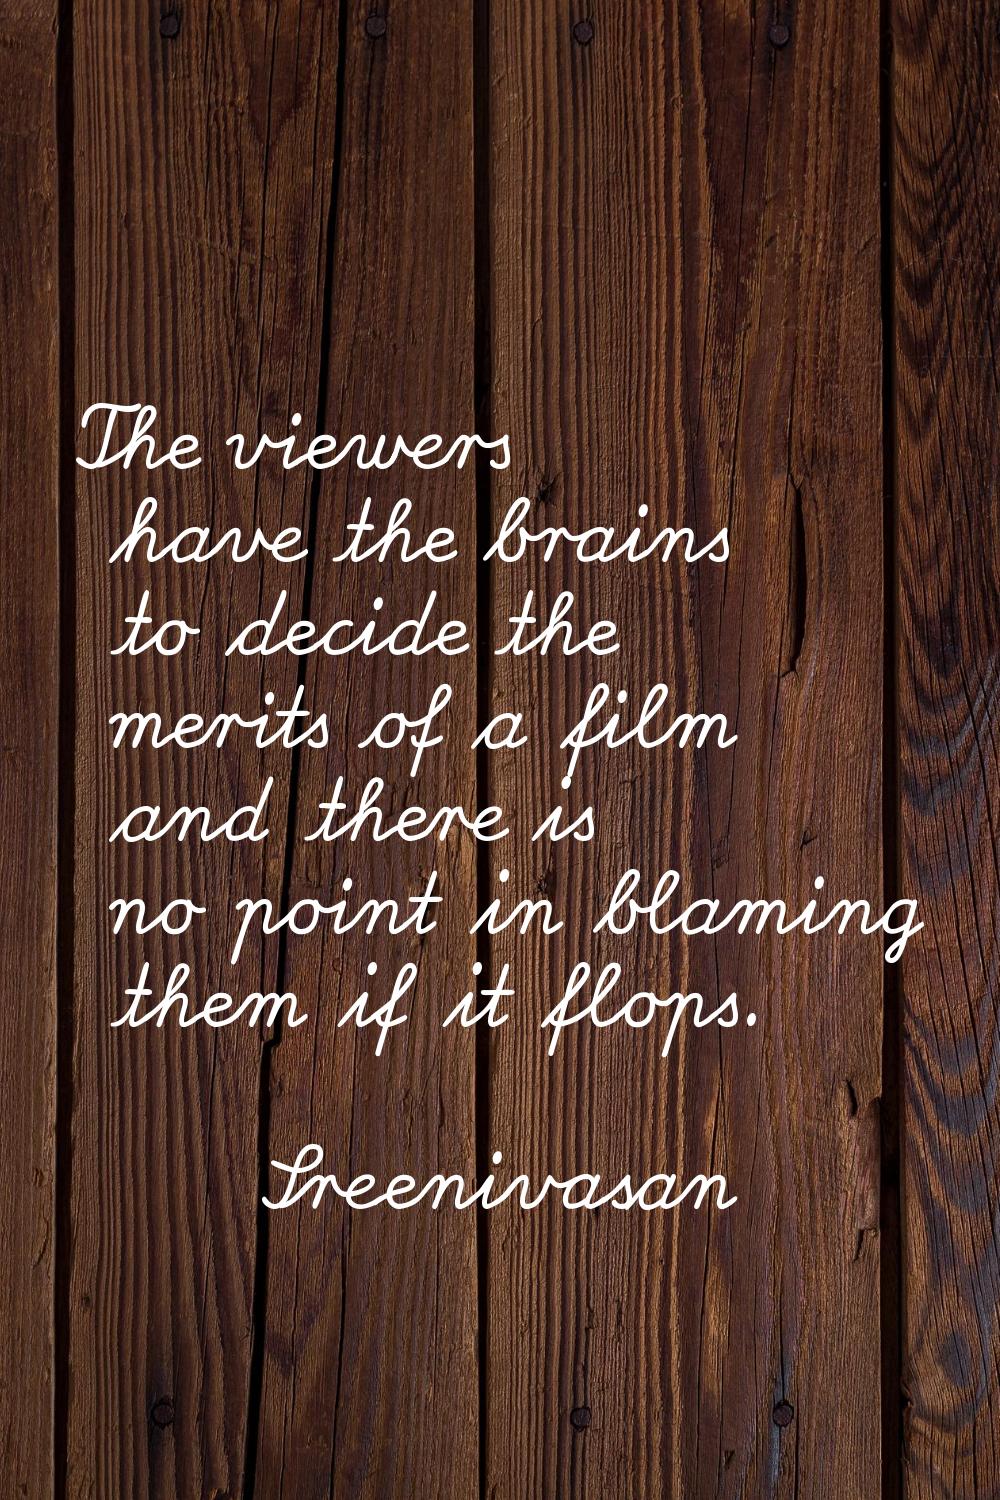 The viewers have the brains to decide the merits of a film and there is no point in blaming them if